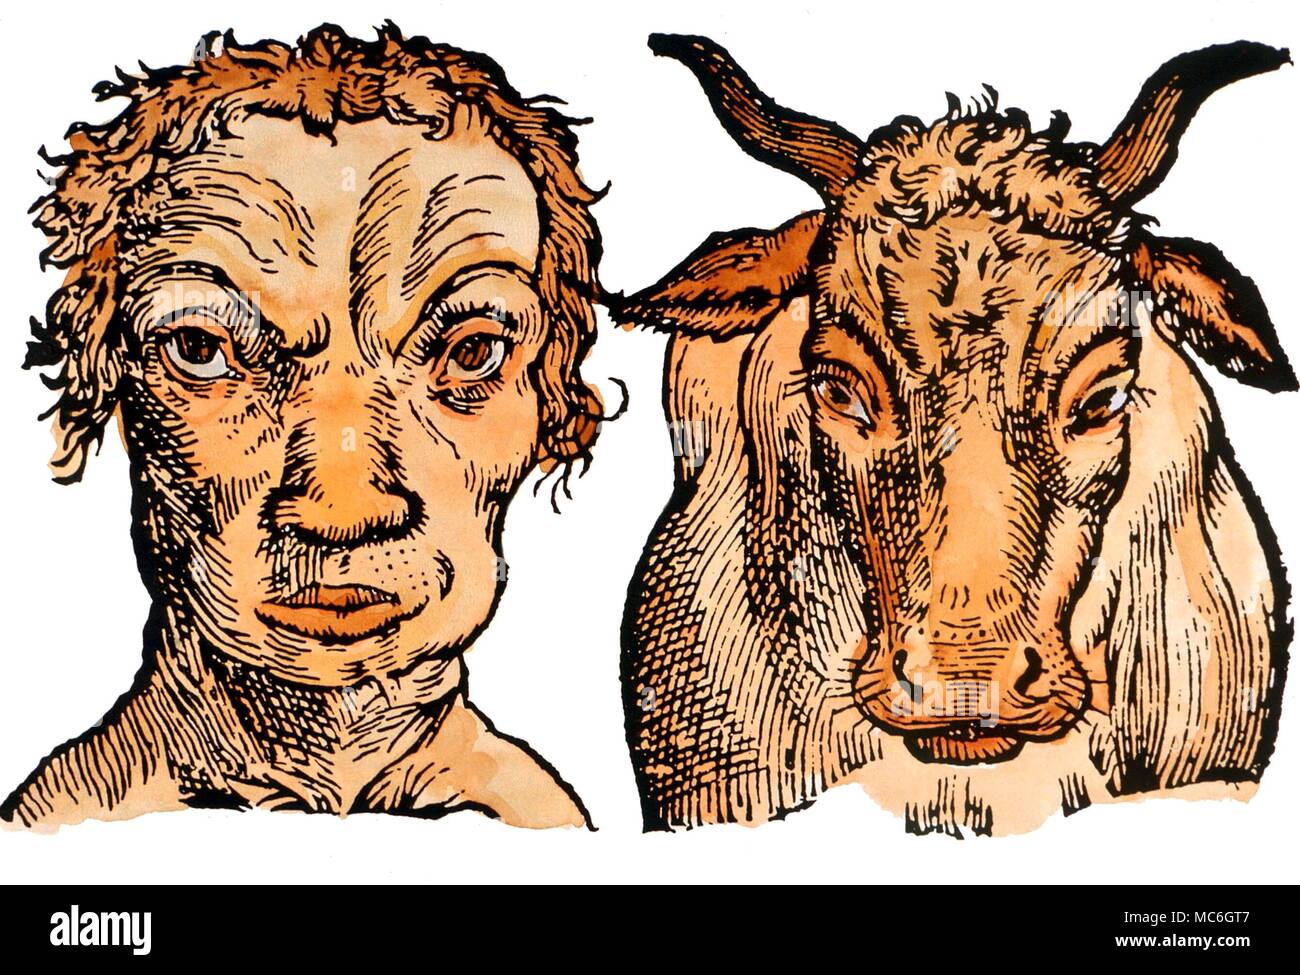 ASTROLOGY - BOVINE PHYSIOGNOMY The appearance of the Taurean type, compard with the appearance of a bull. Loose print, presumably after Delaporta's 'Physiognomy'. 17th century Stock Photo